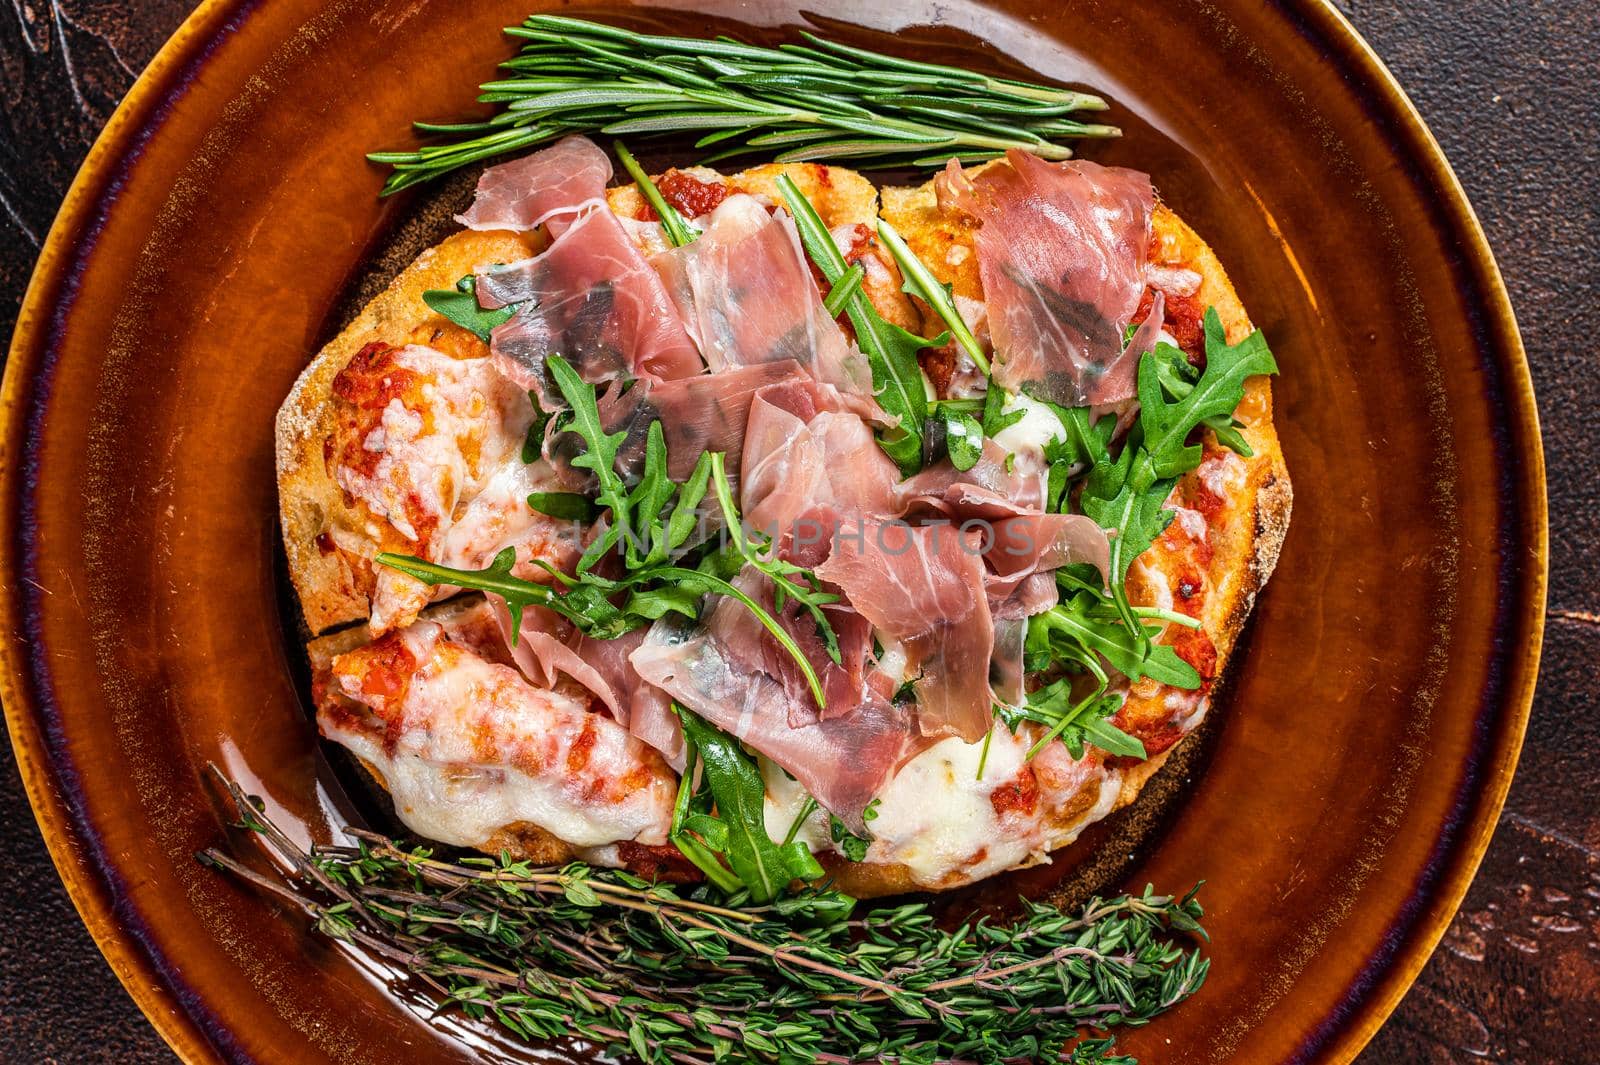 Pizza with prosciutto parma ham, arugula salad and parmesan cheese in a rustic plate. wooden background. Top view by Composter